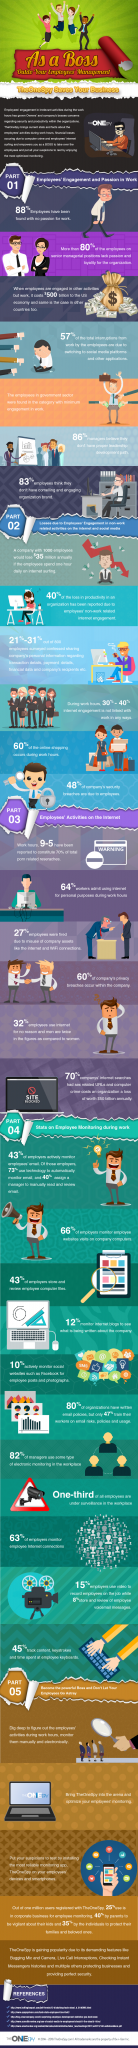 Infographic – How To Monitor and Manage Workplace